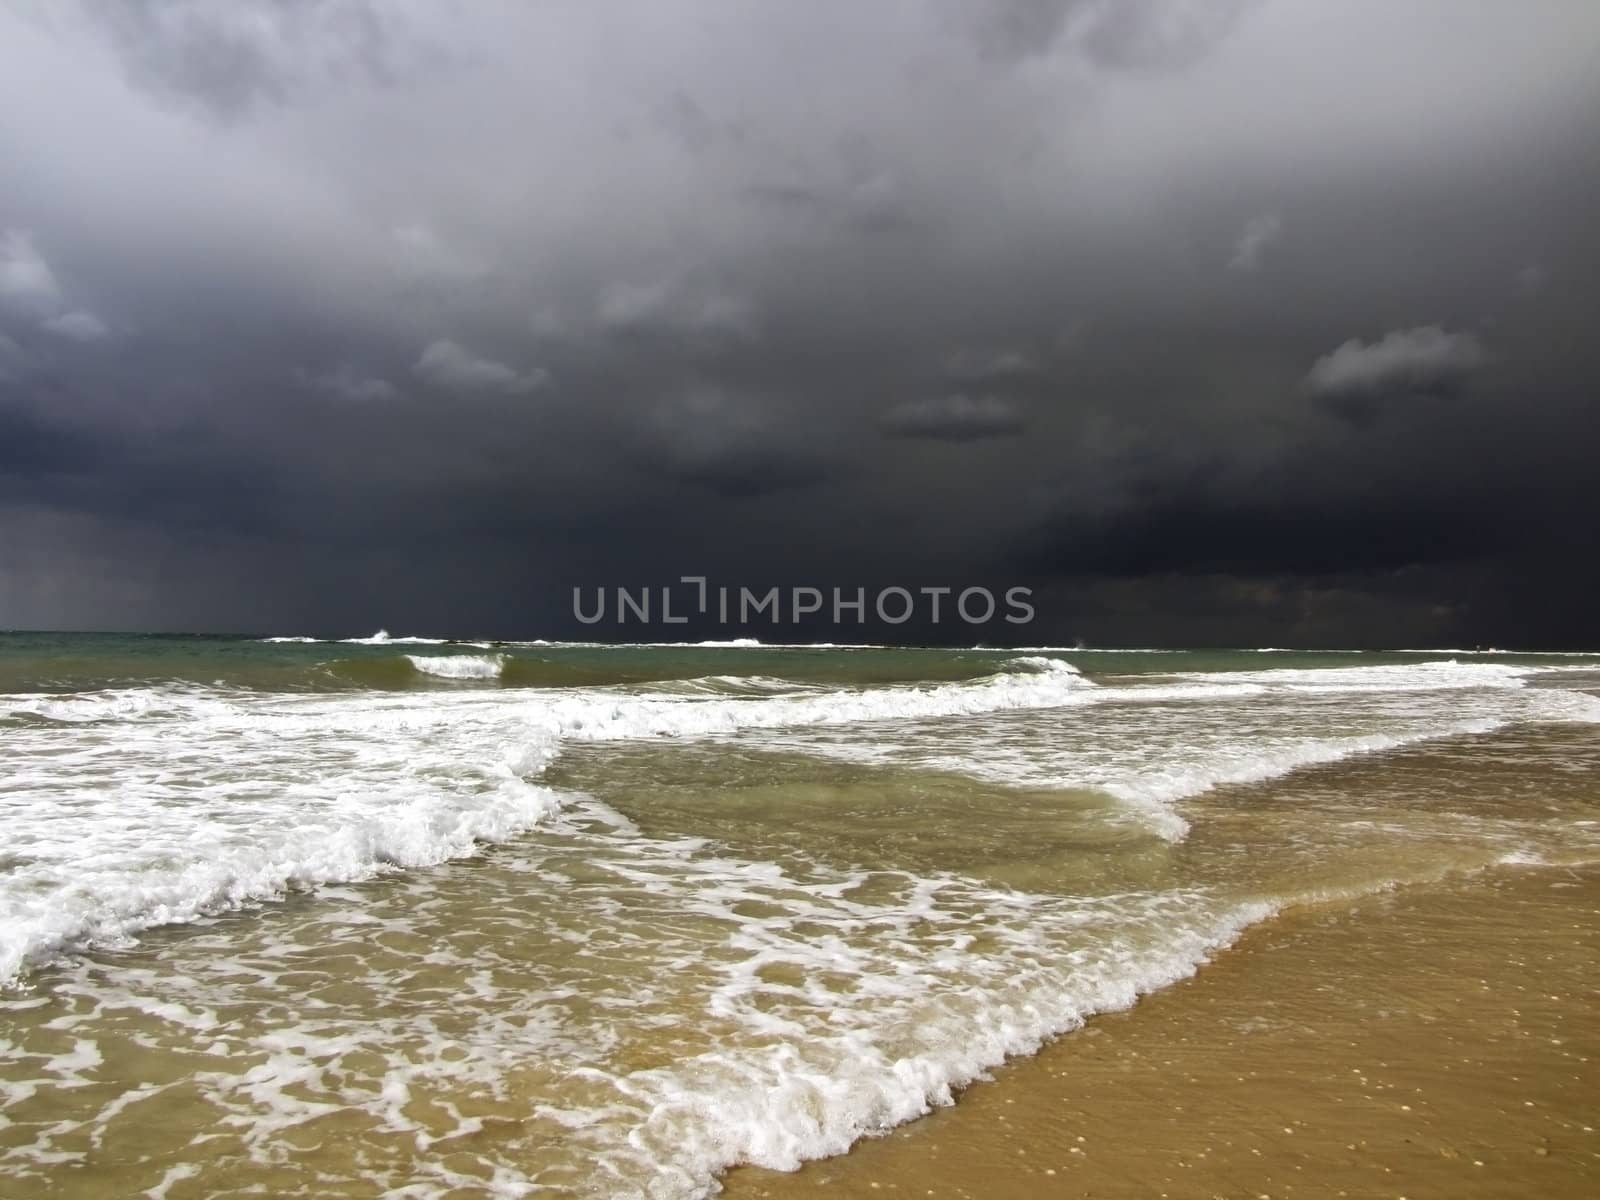 black storm clouds over the Mediterranean Sea and the waves incident on the beach